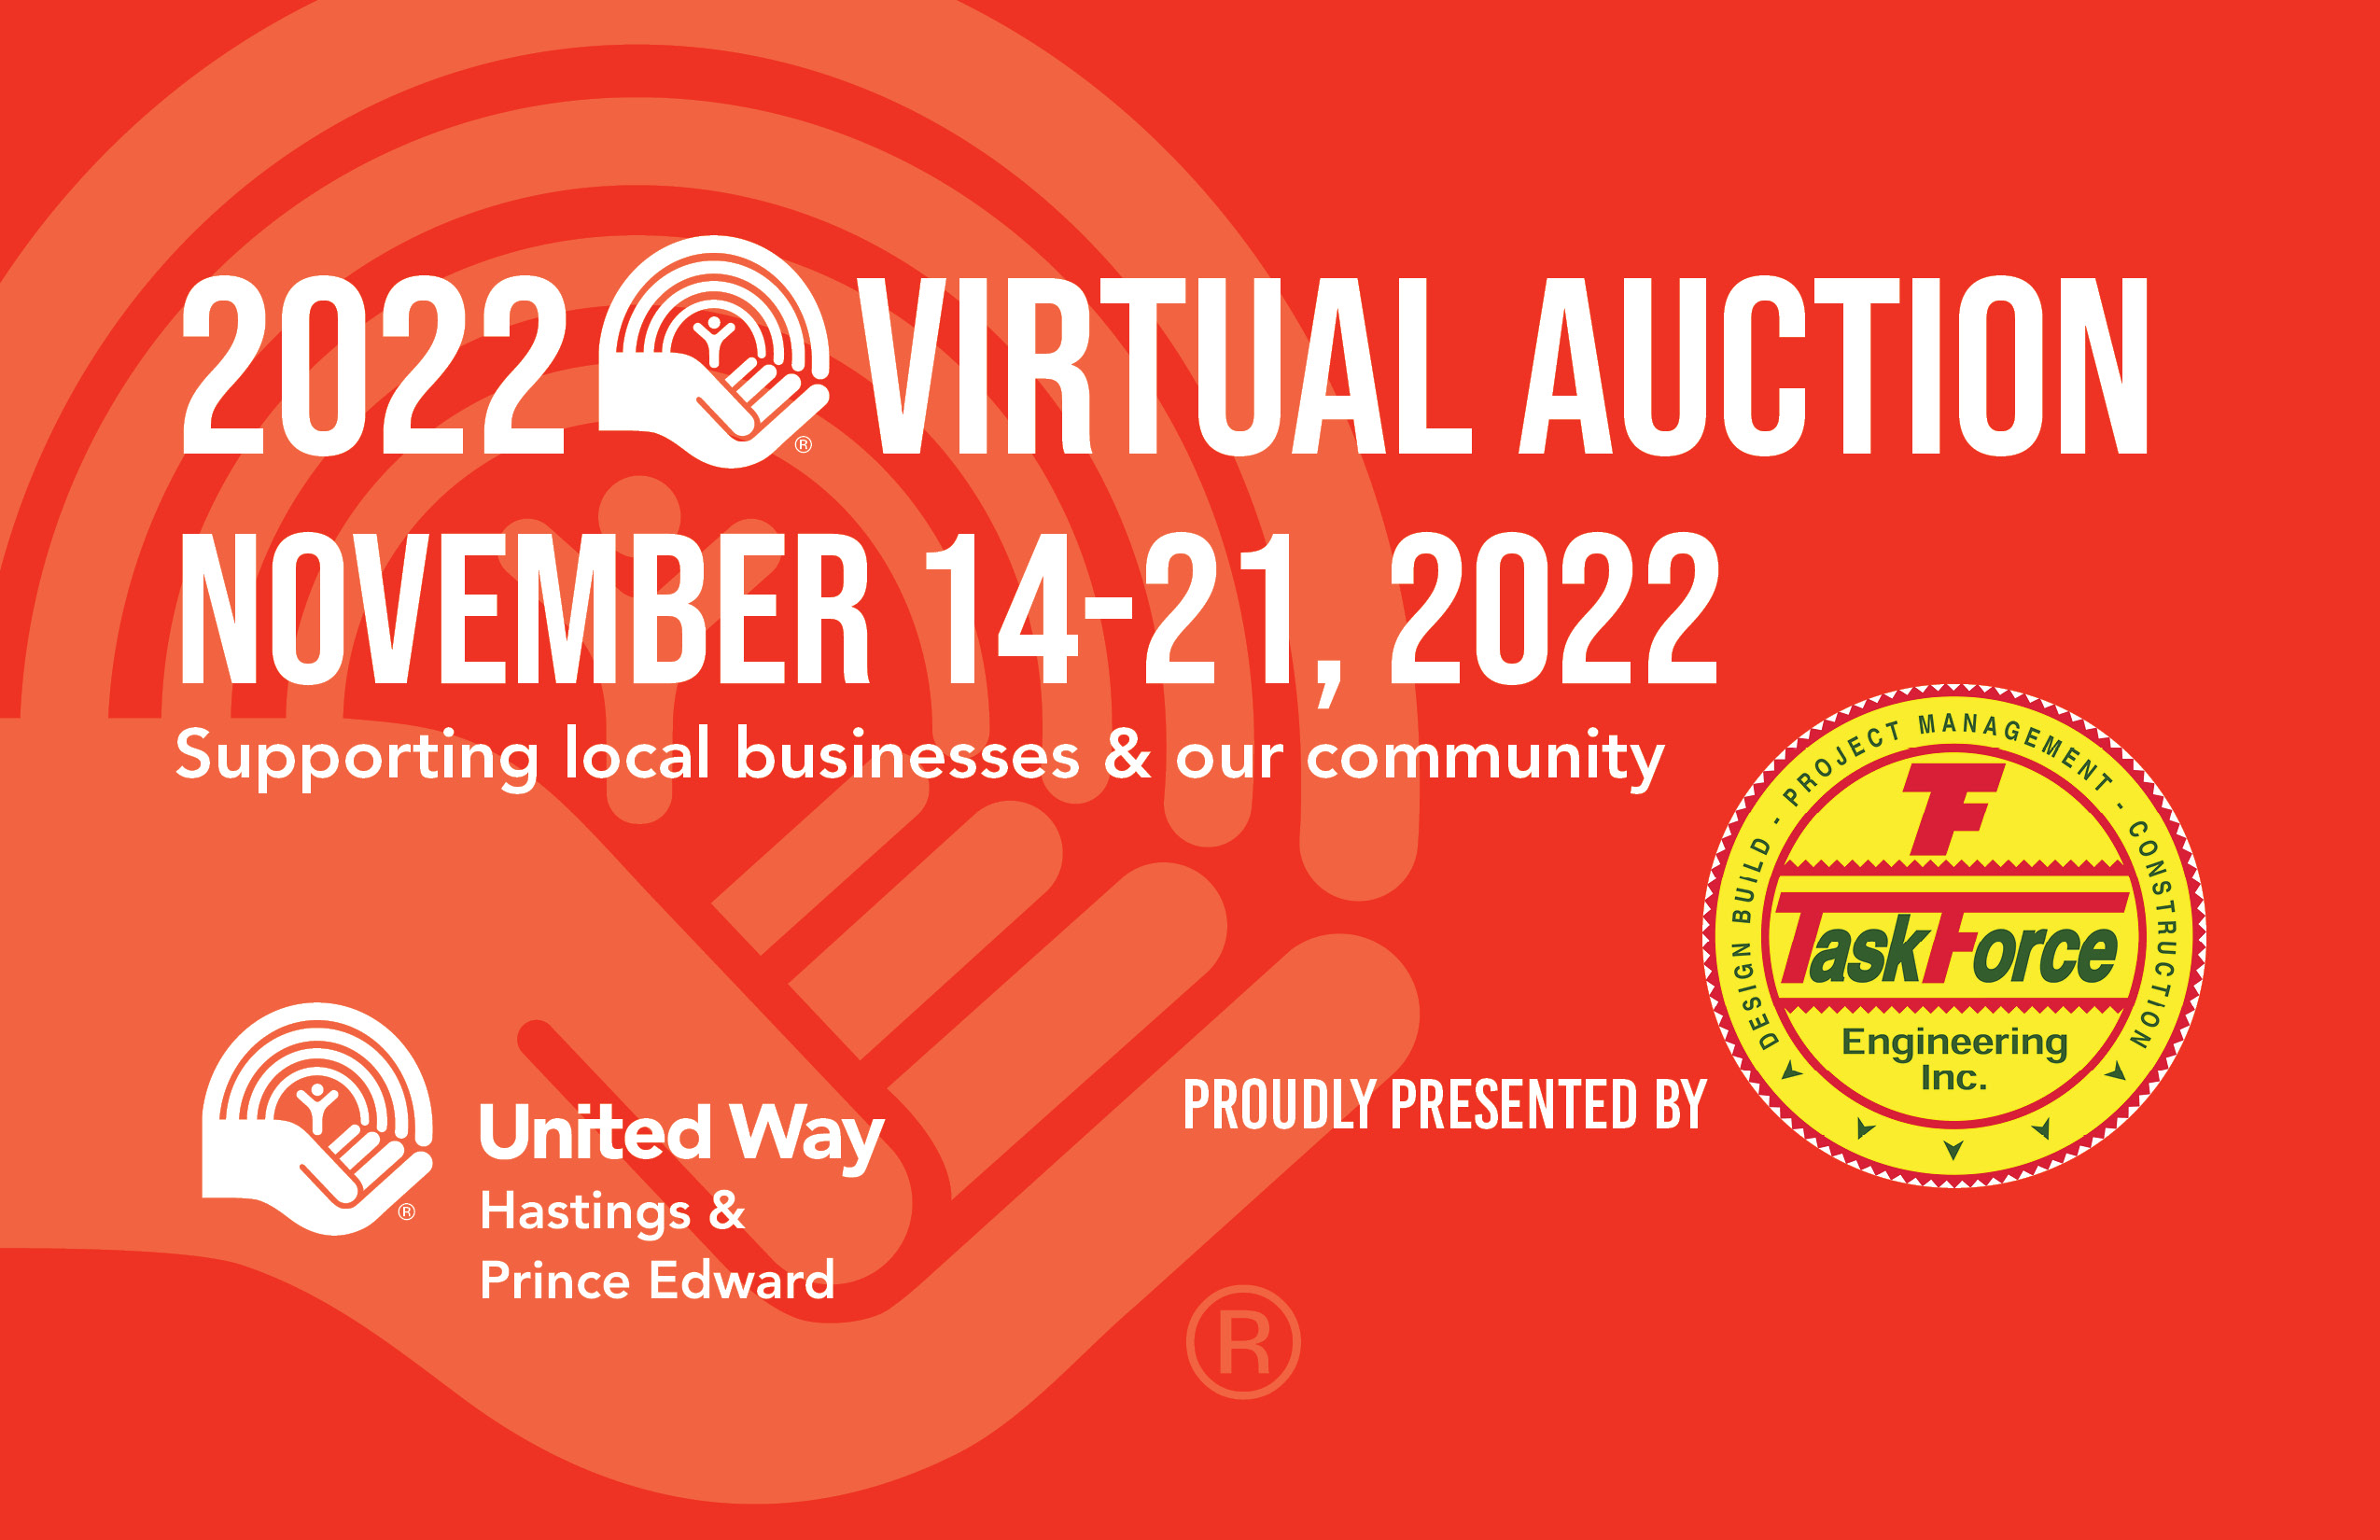 United Way HPE Virtual Auction